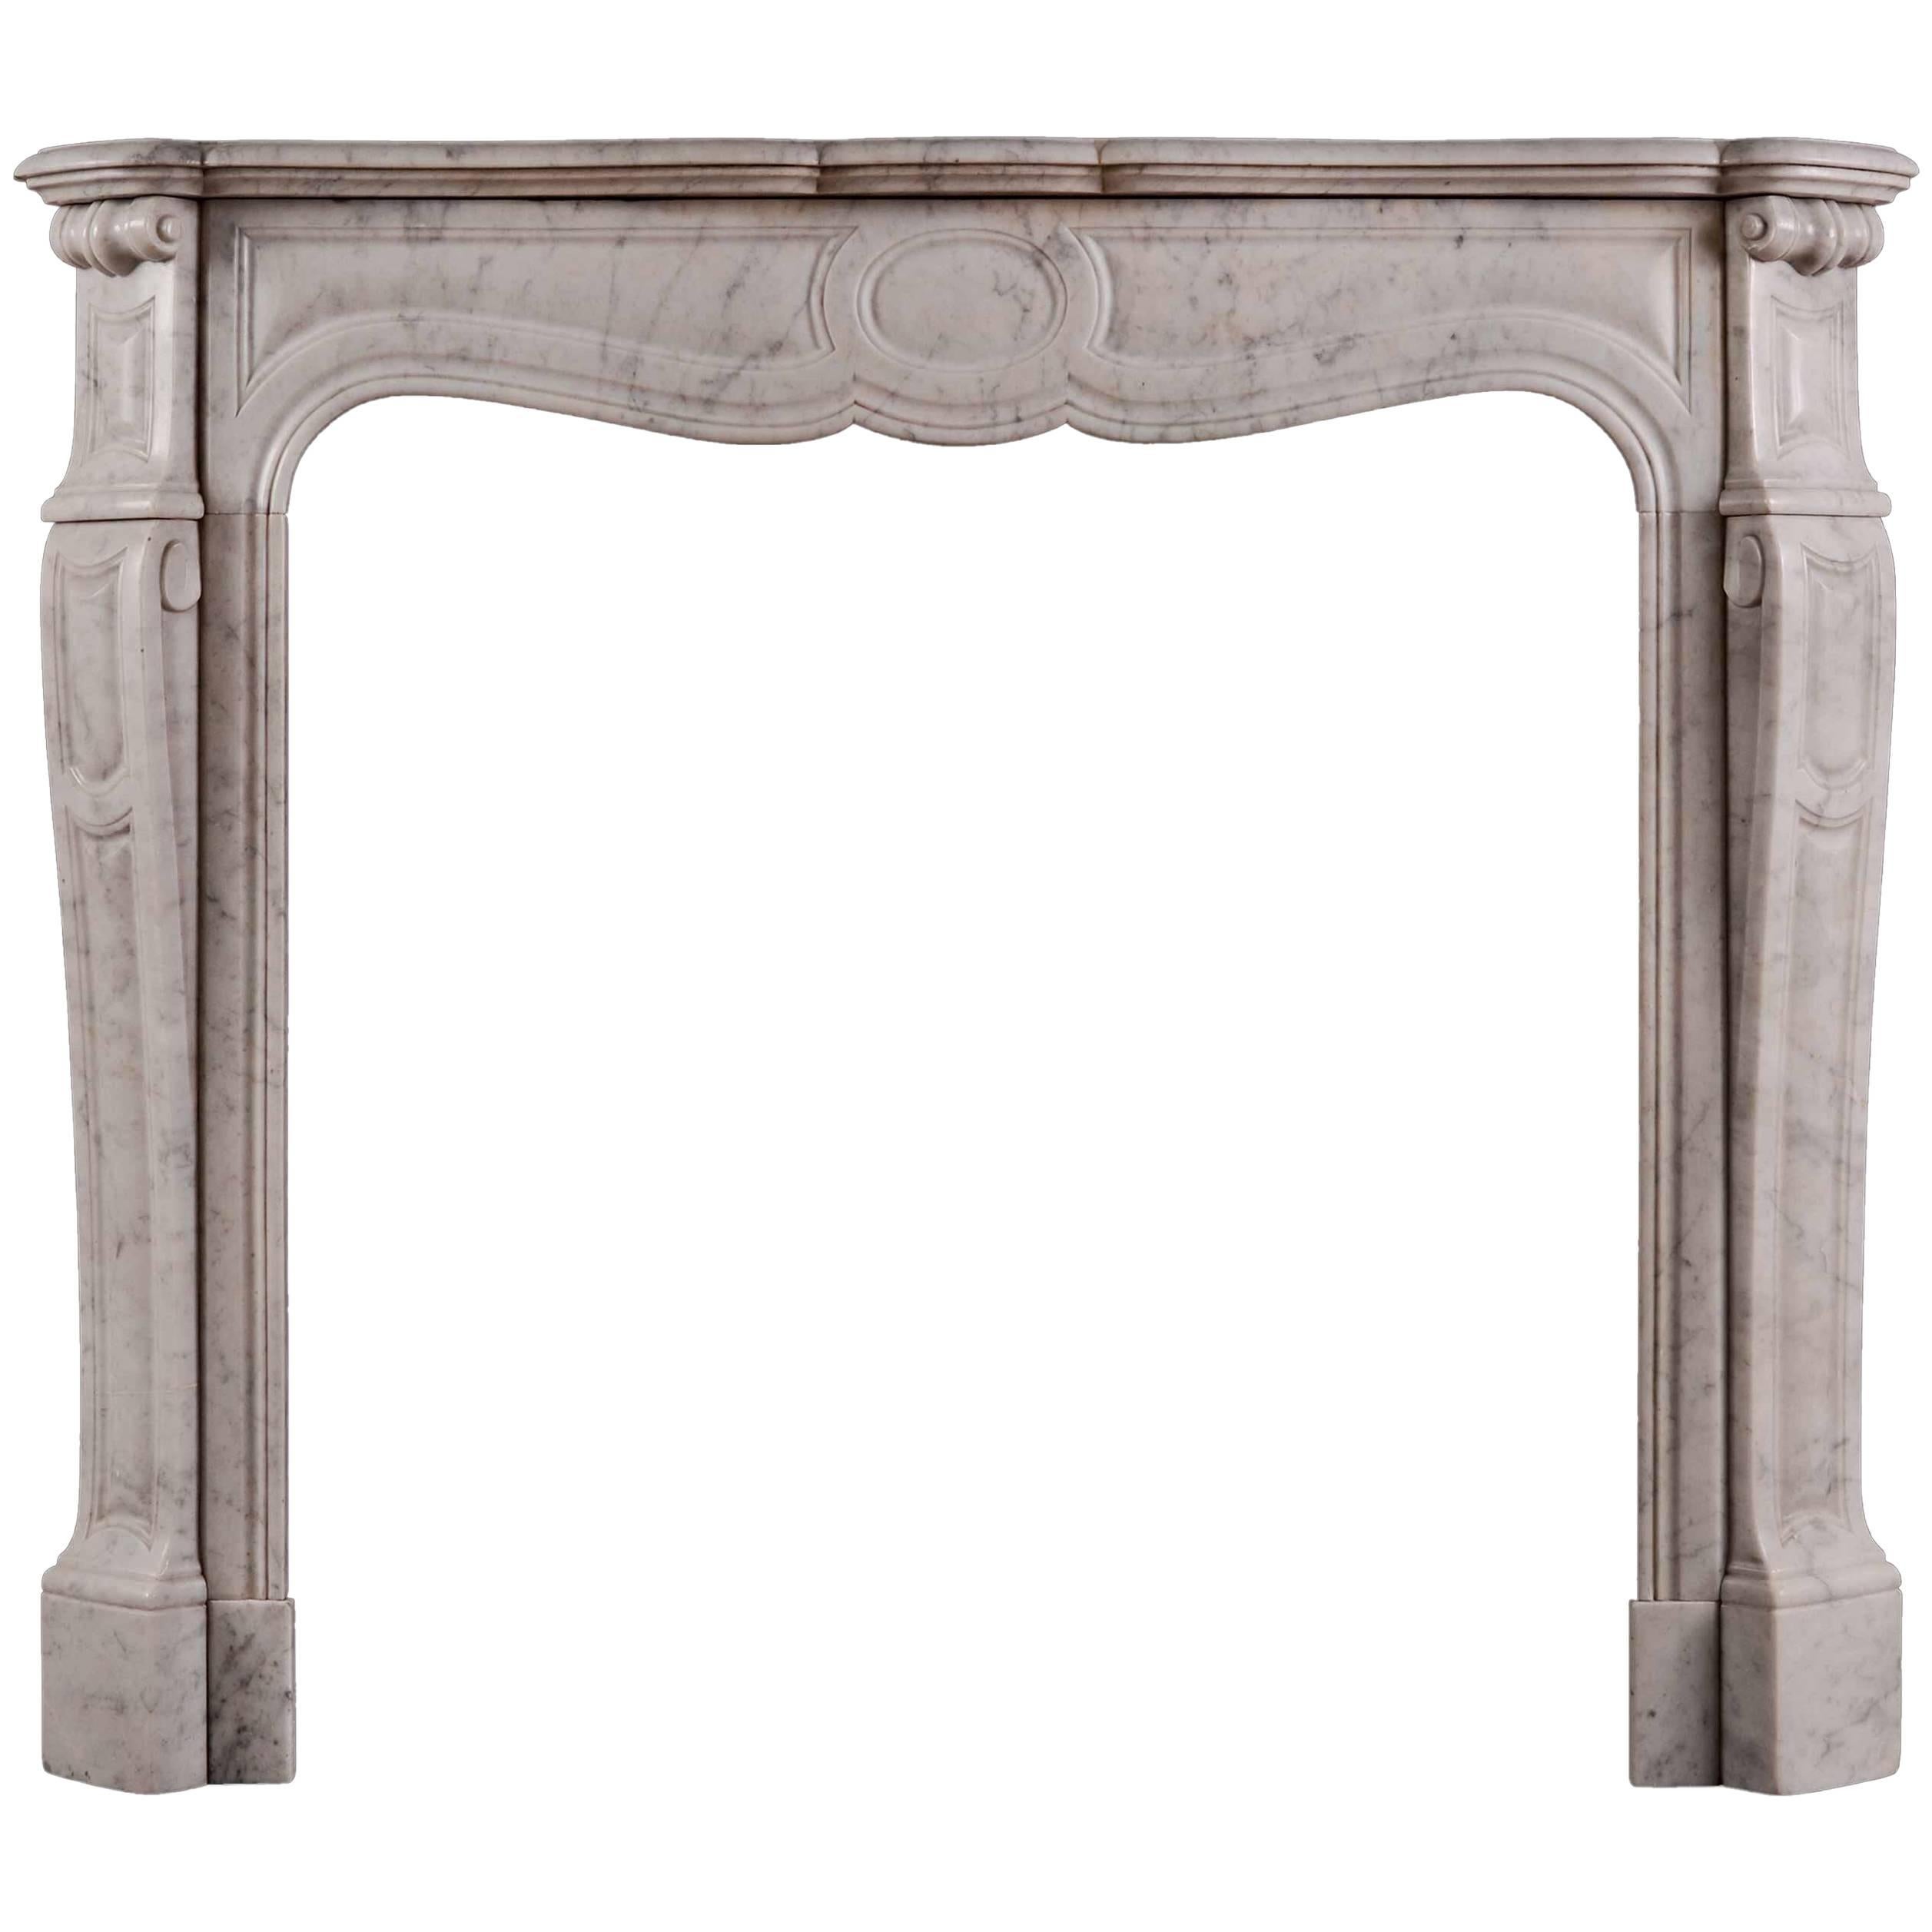 Antique French Louis XVI Style Carrara Marble Fireplace Surround